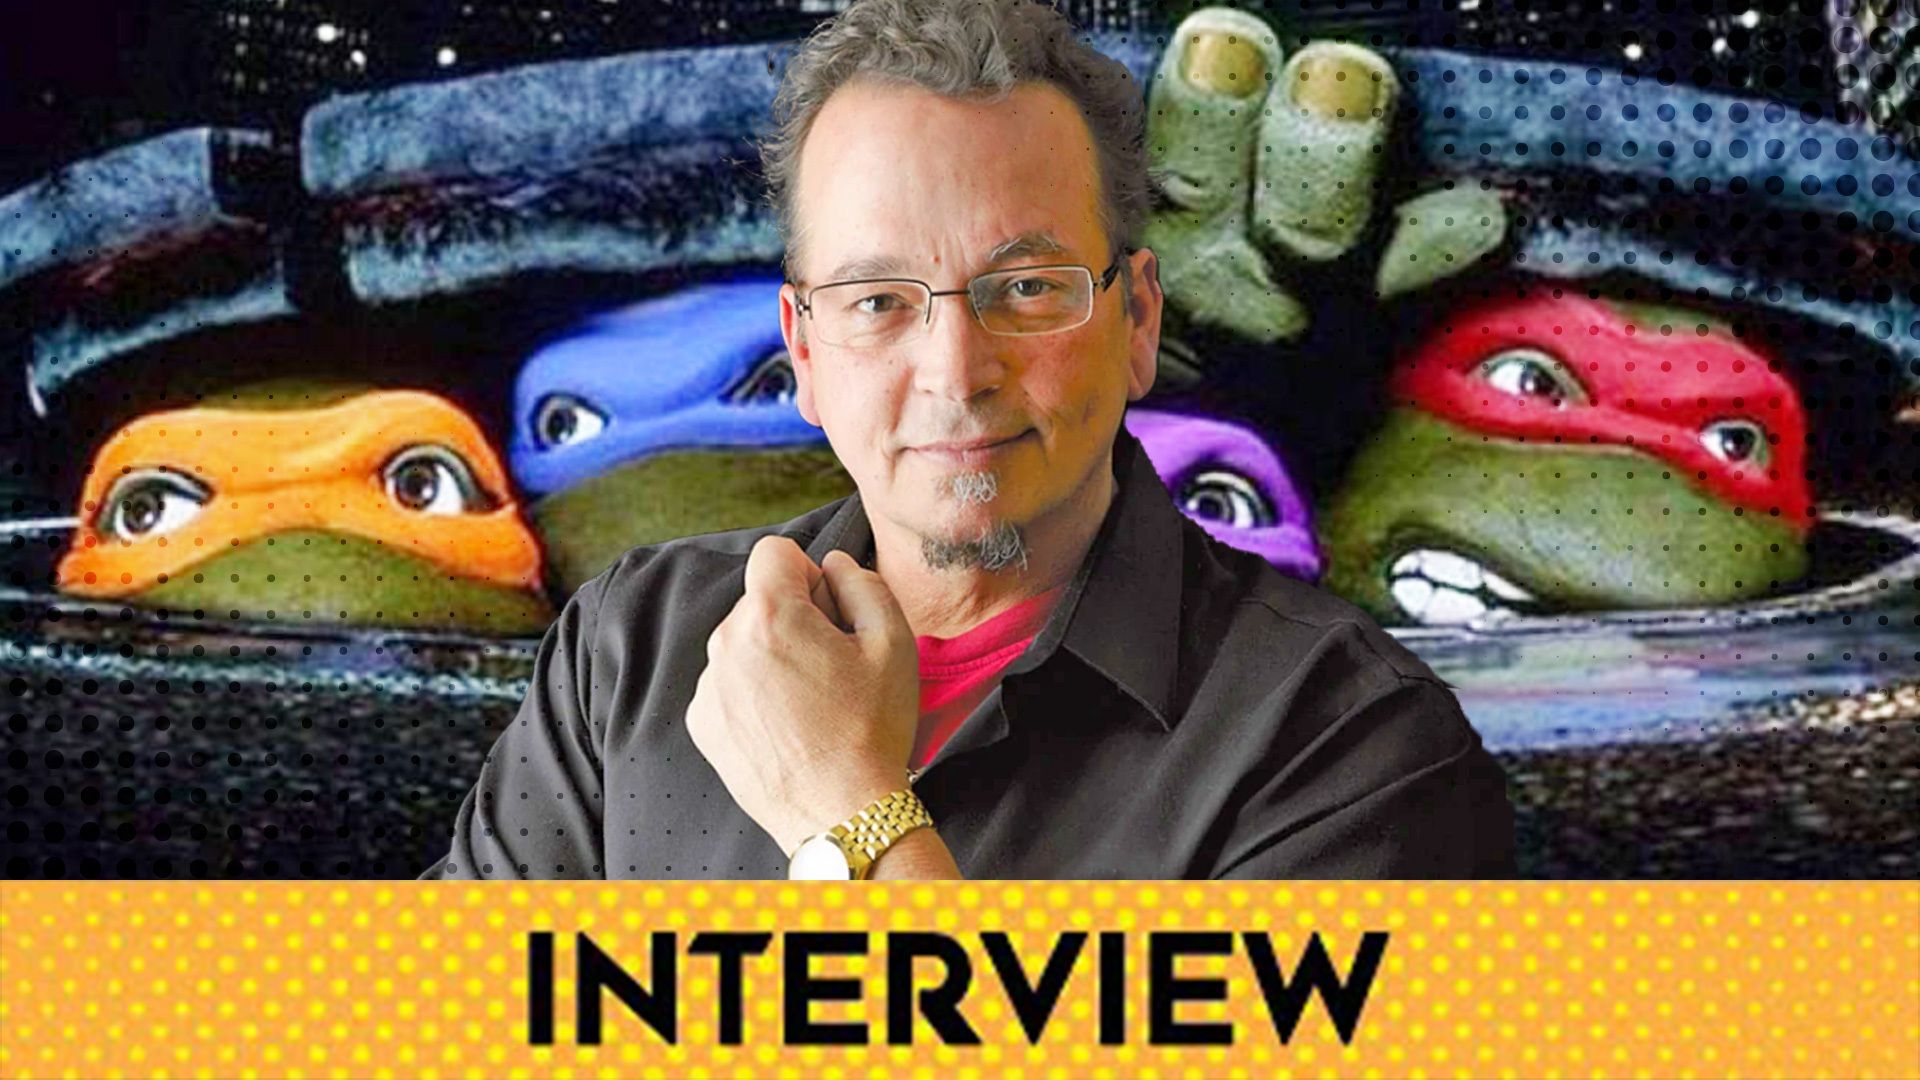 TMNT Kevin Eastman Explores the Franchise's Radical Legacy and Future